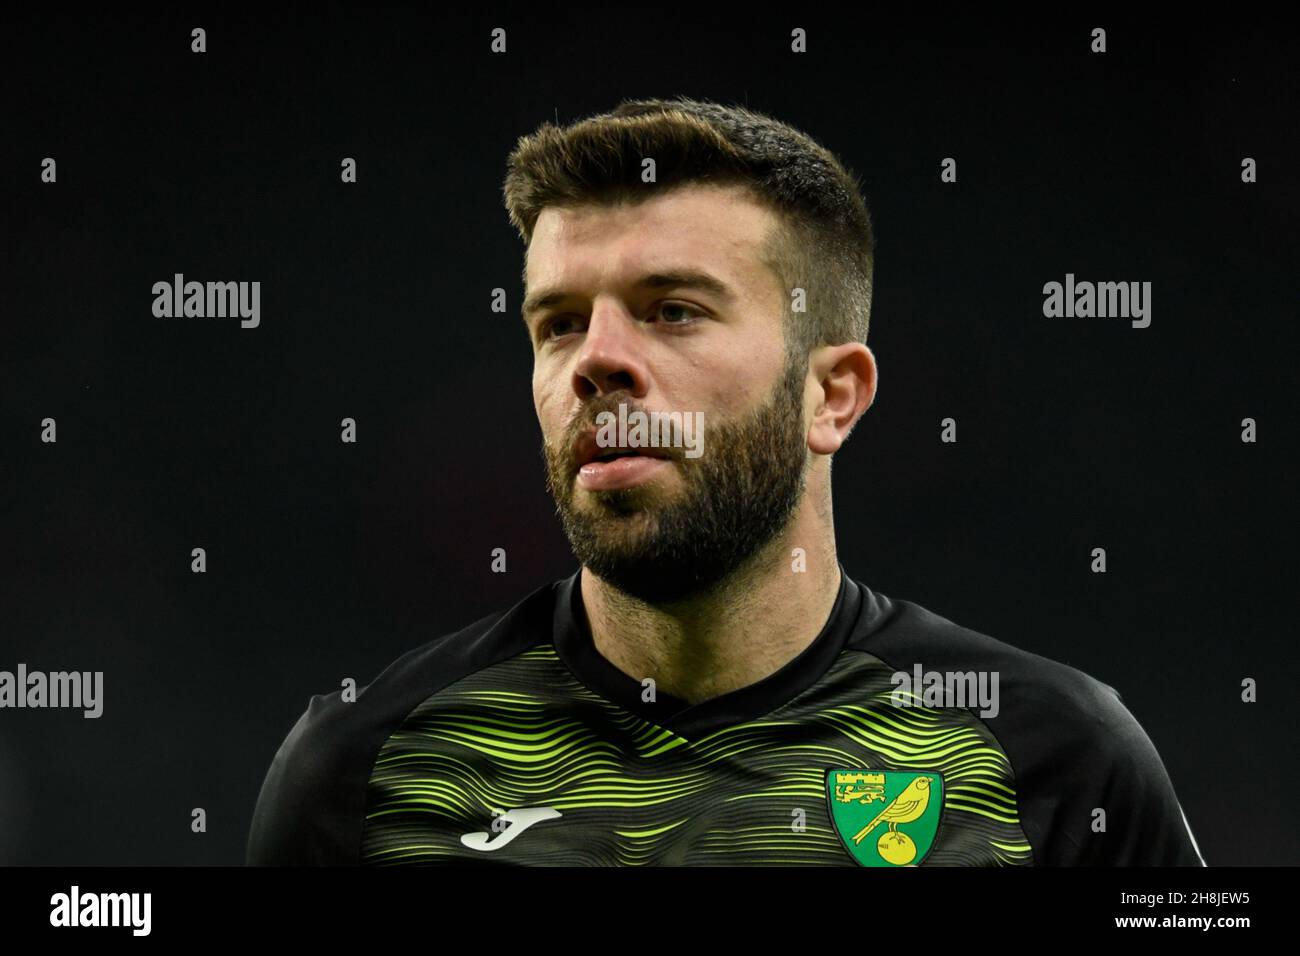 Grant Hanley #5 of Norwich City warming up before the game Stock Photo